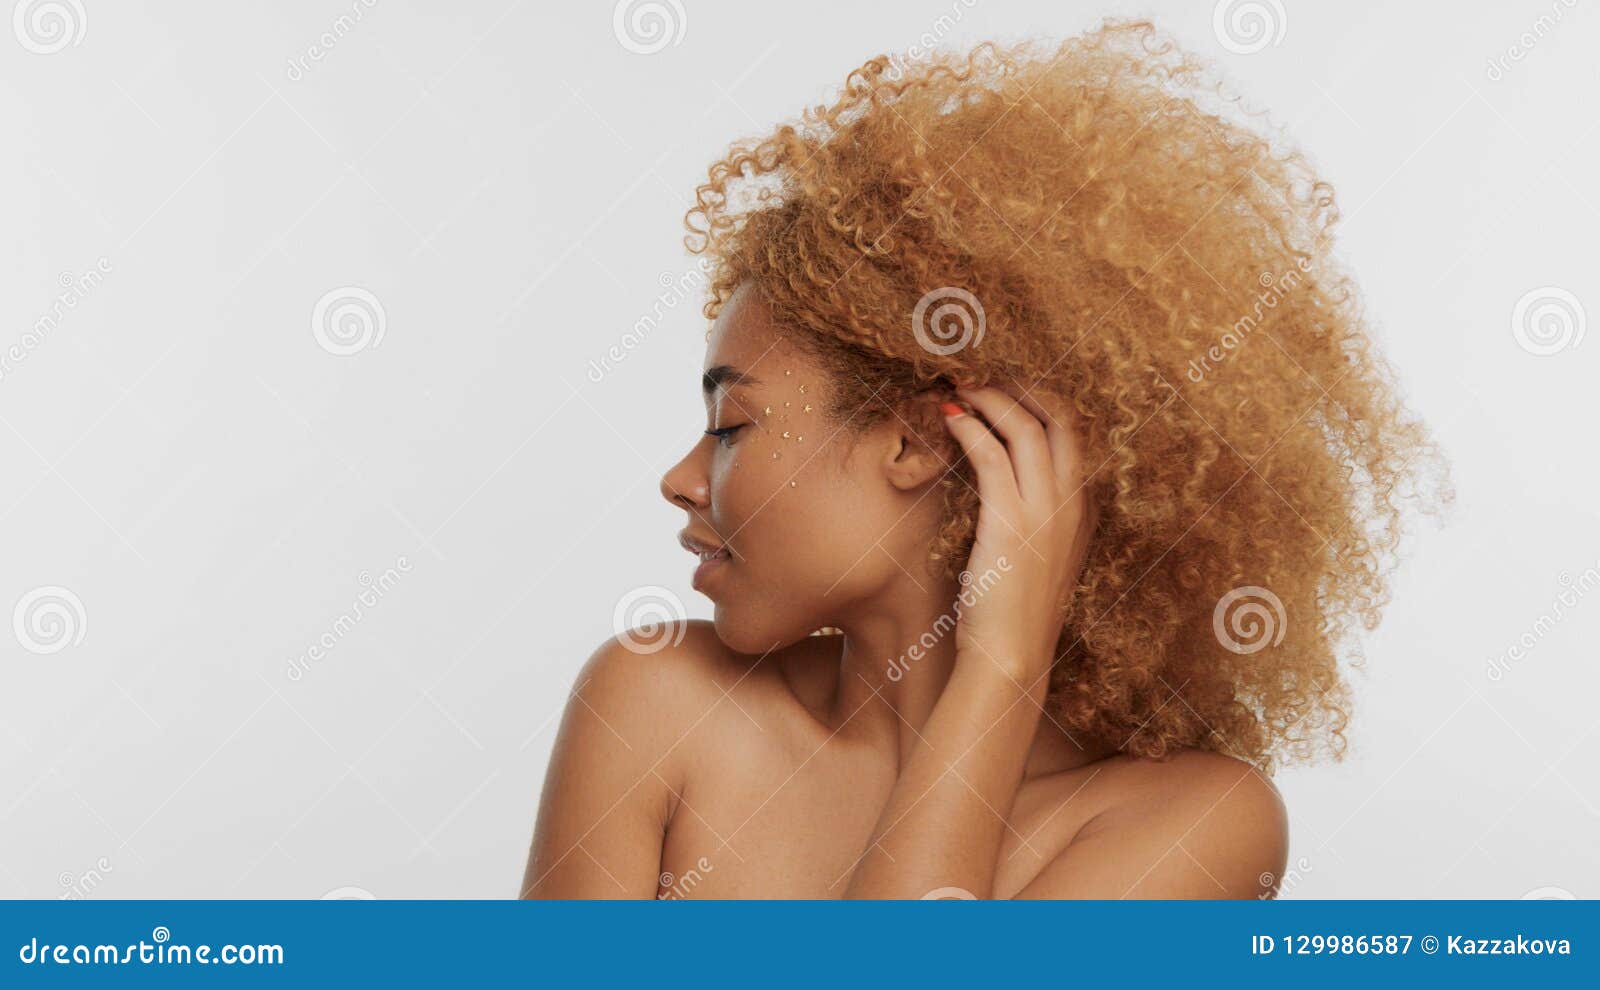 Mixed Race Black Blonde Model With Curly Hair Stock Image